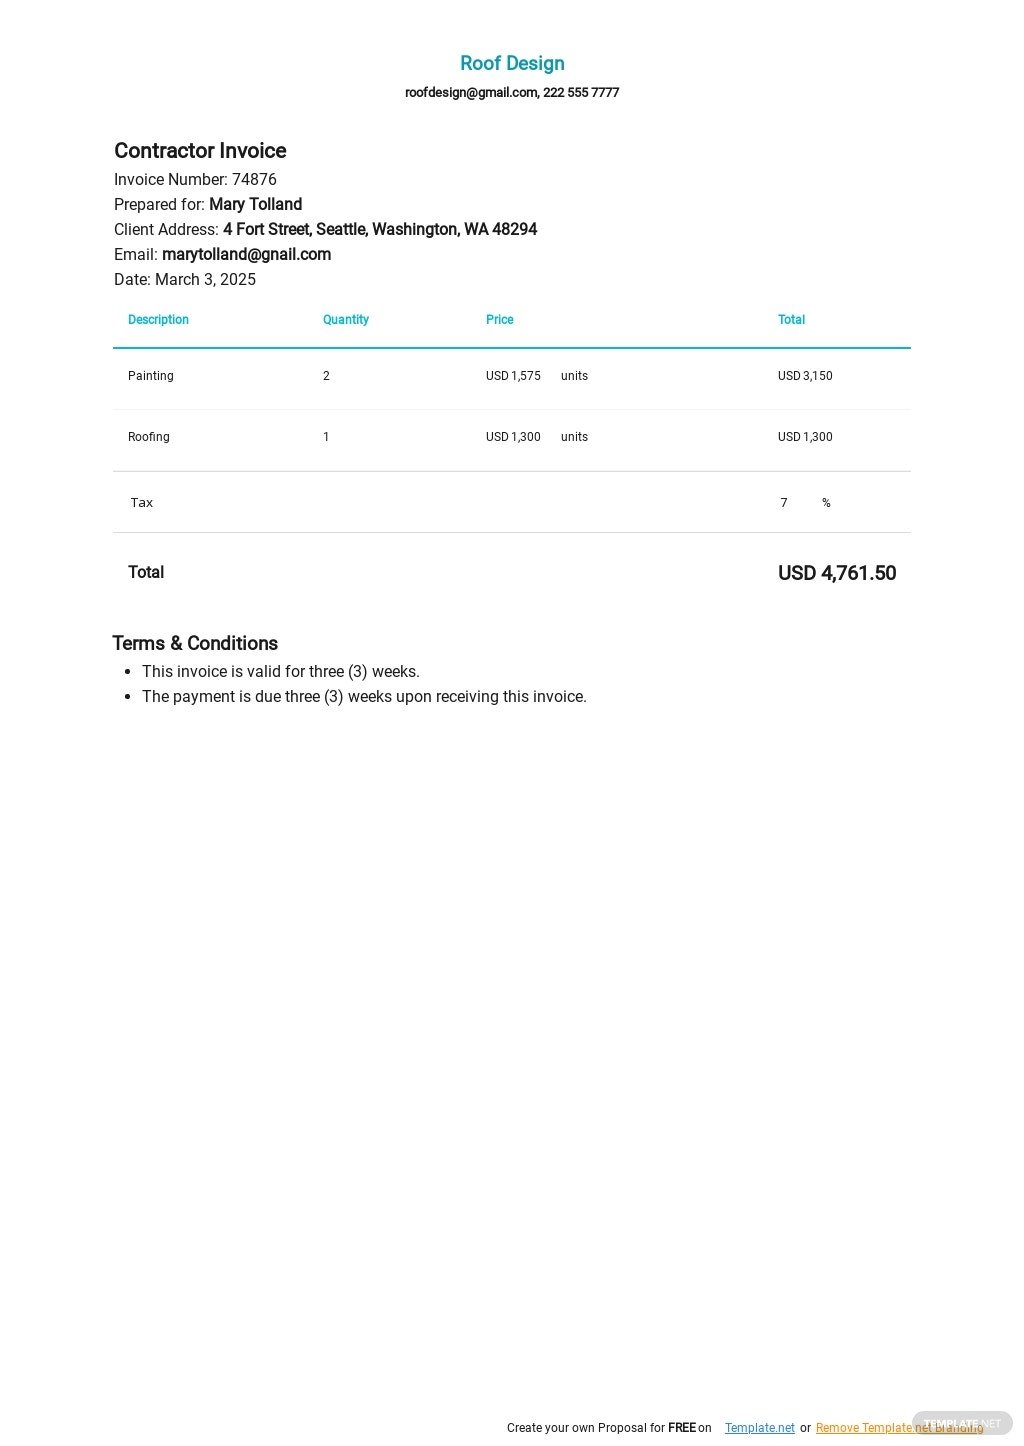 blank contractor invoice template